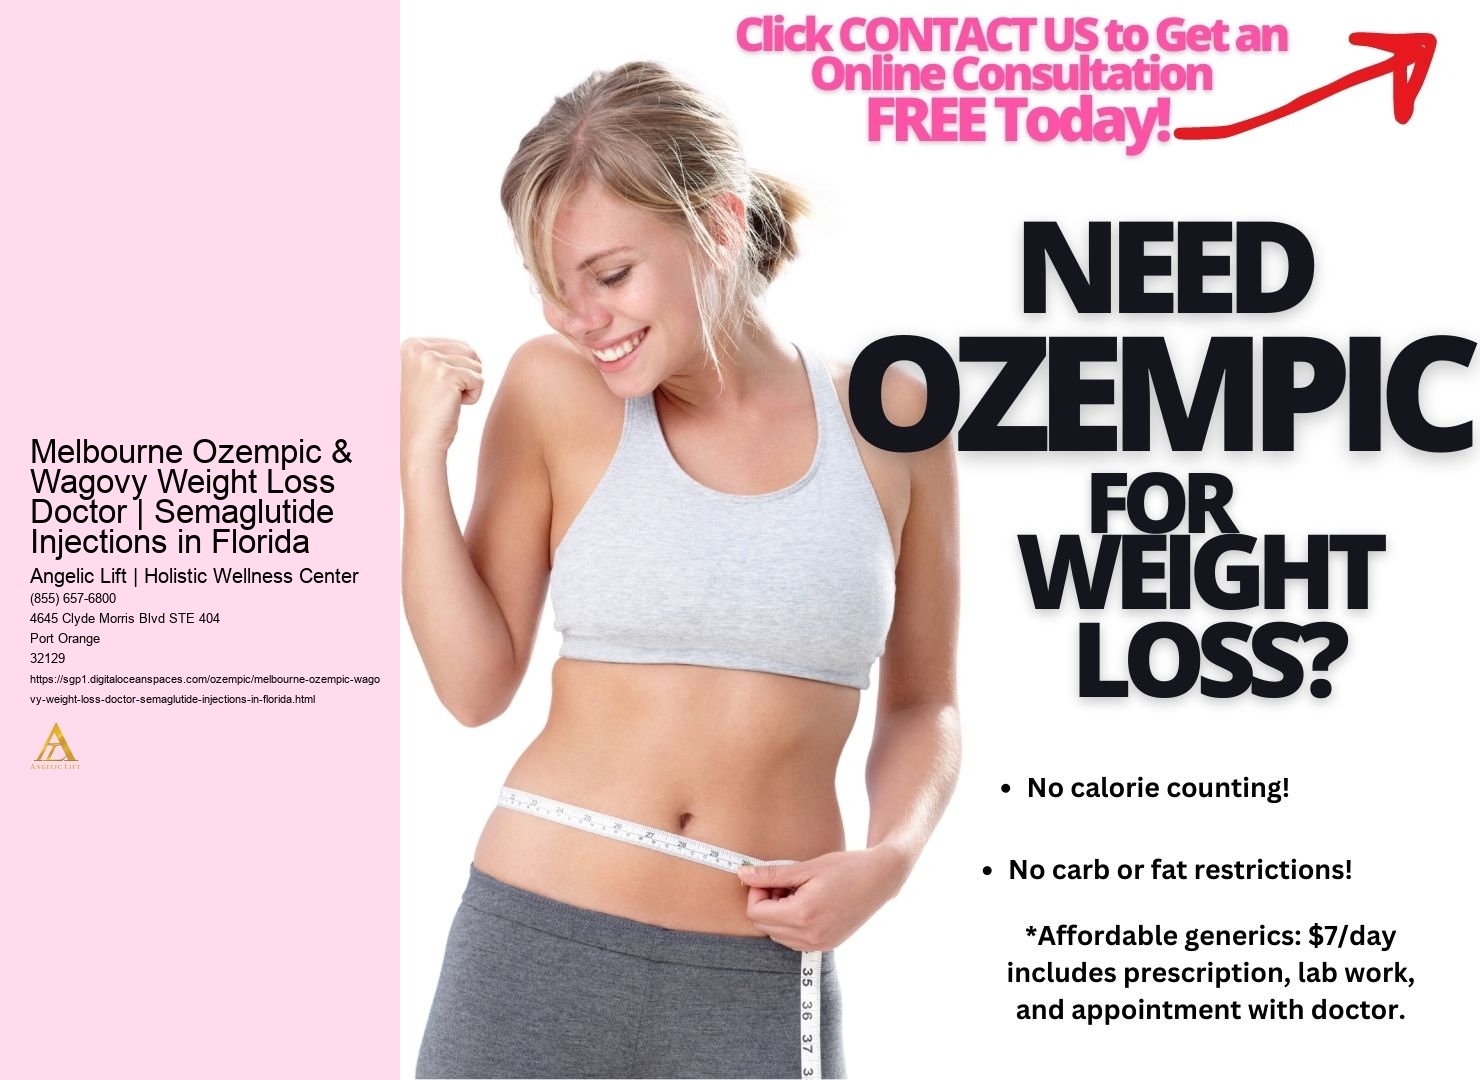 Melbourne Ozempic & Wagovy Weight Loss Doctor | Semaglutide Injections in Florida